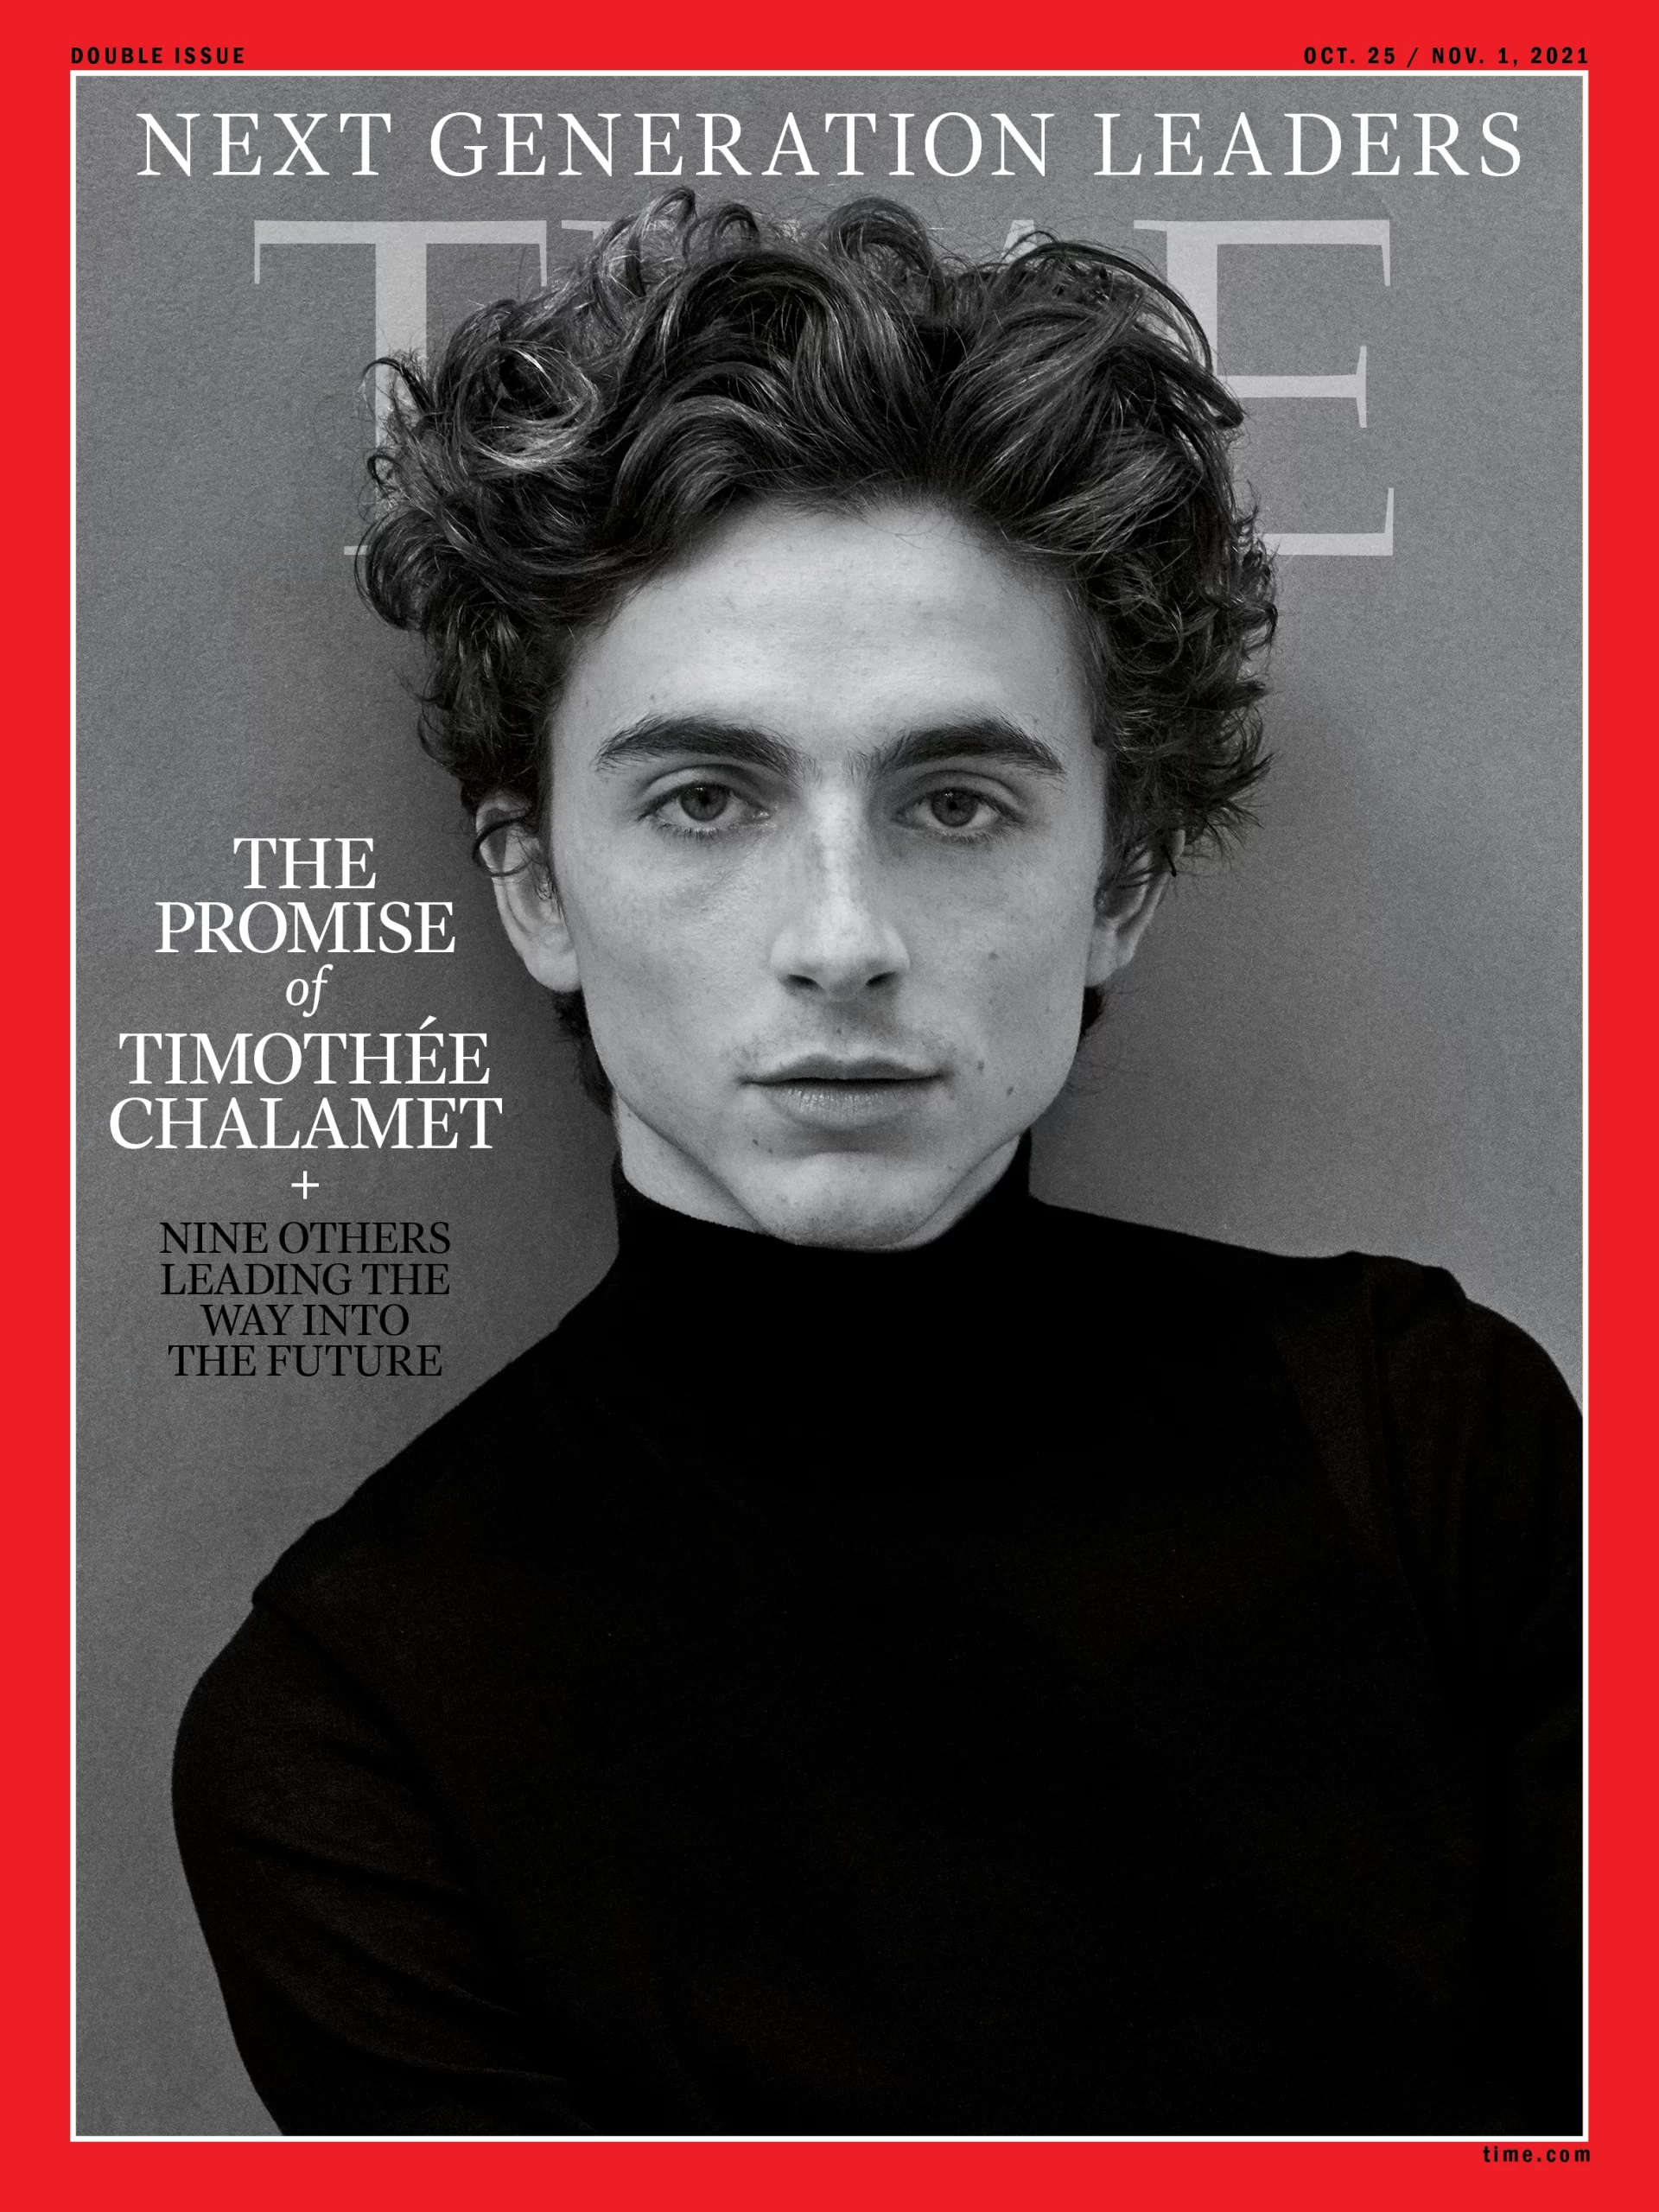 Timothée Chalamet performs unlike any other